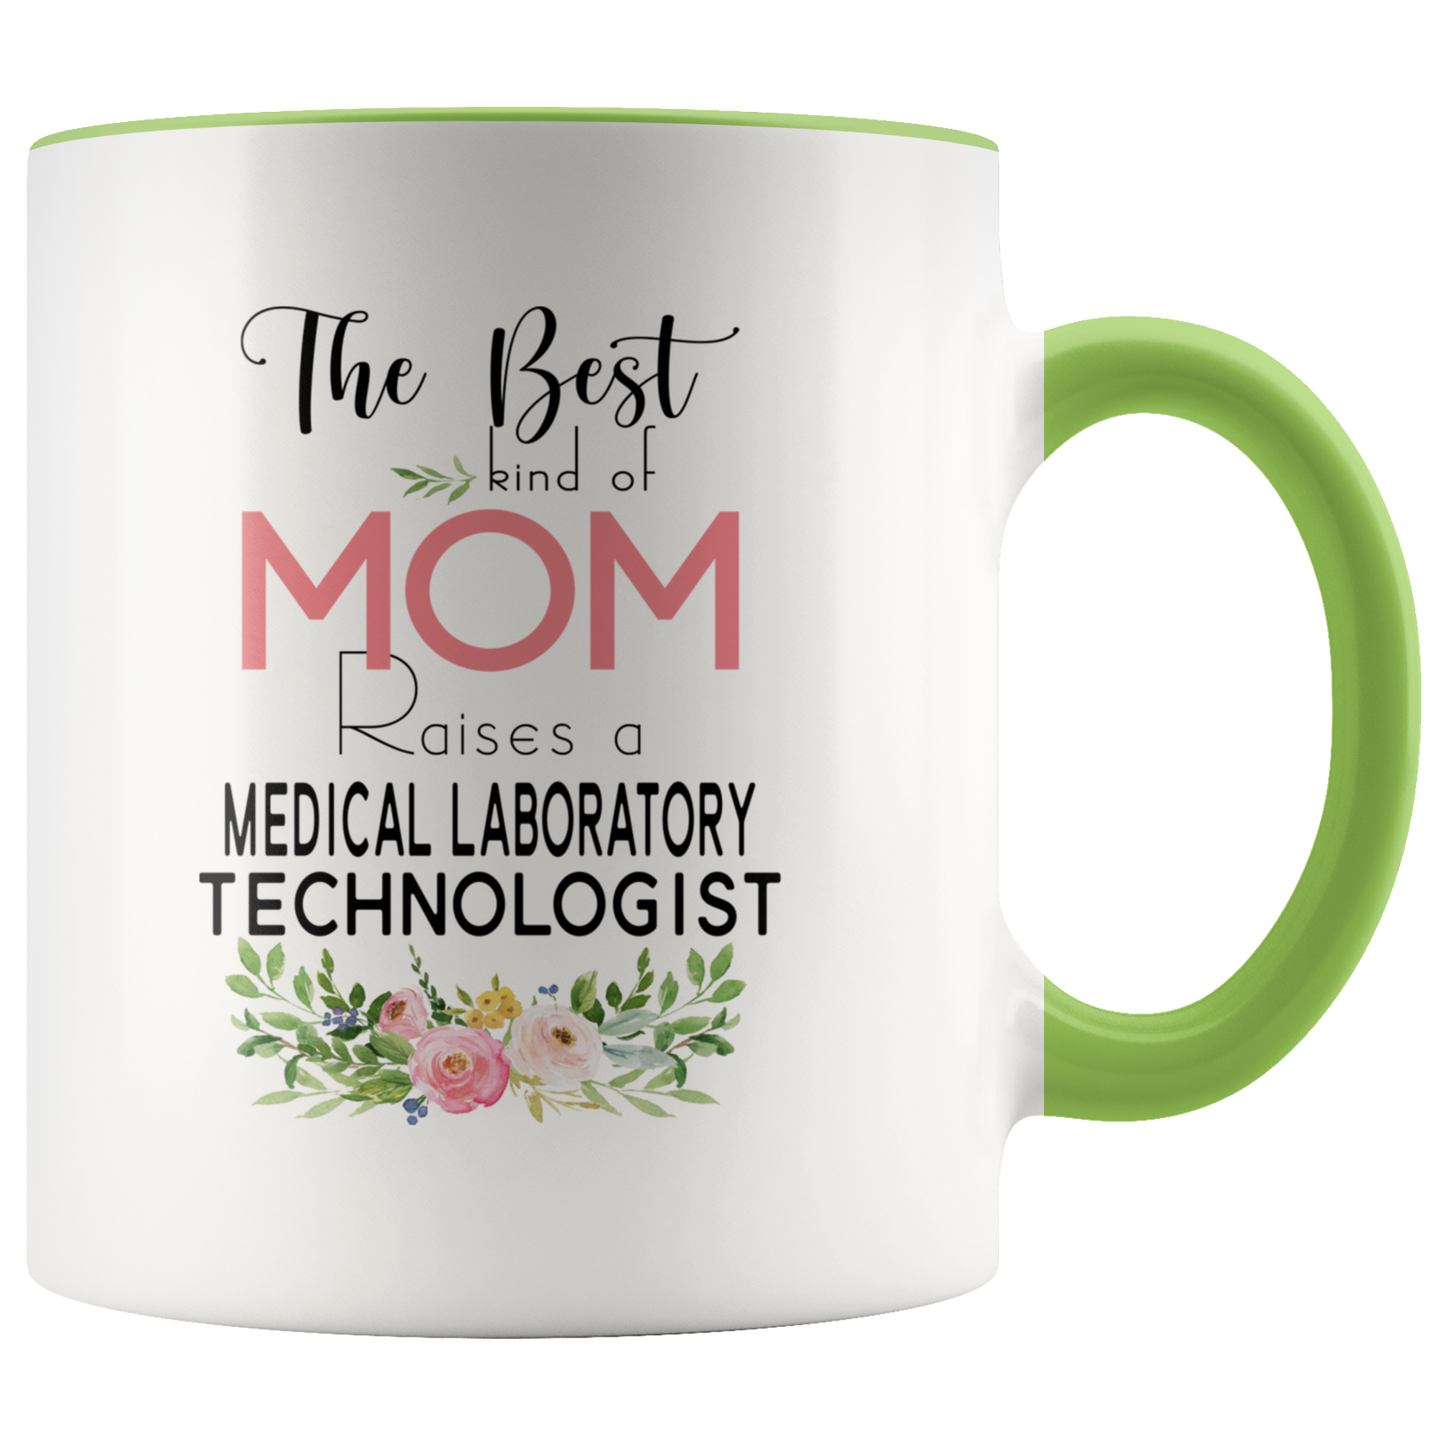 M-21383890-sp-23330 - Mothers Day Mugs Job Funny - The Best Kind Of Mom Raises A M